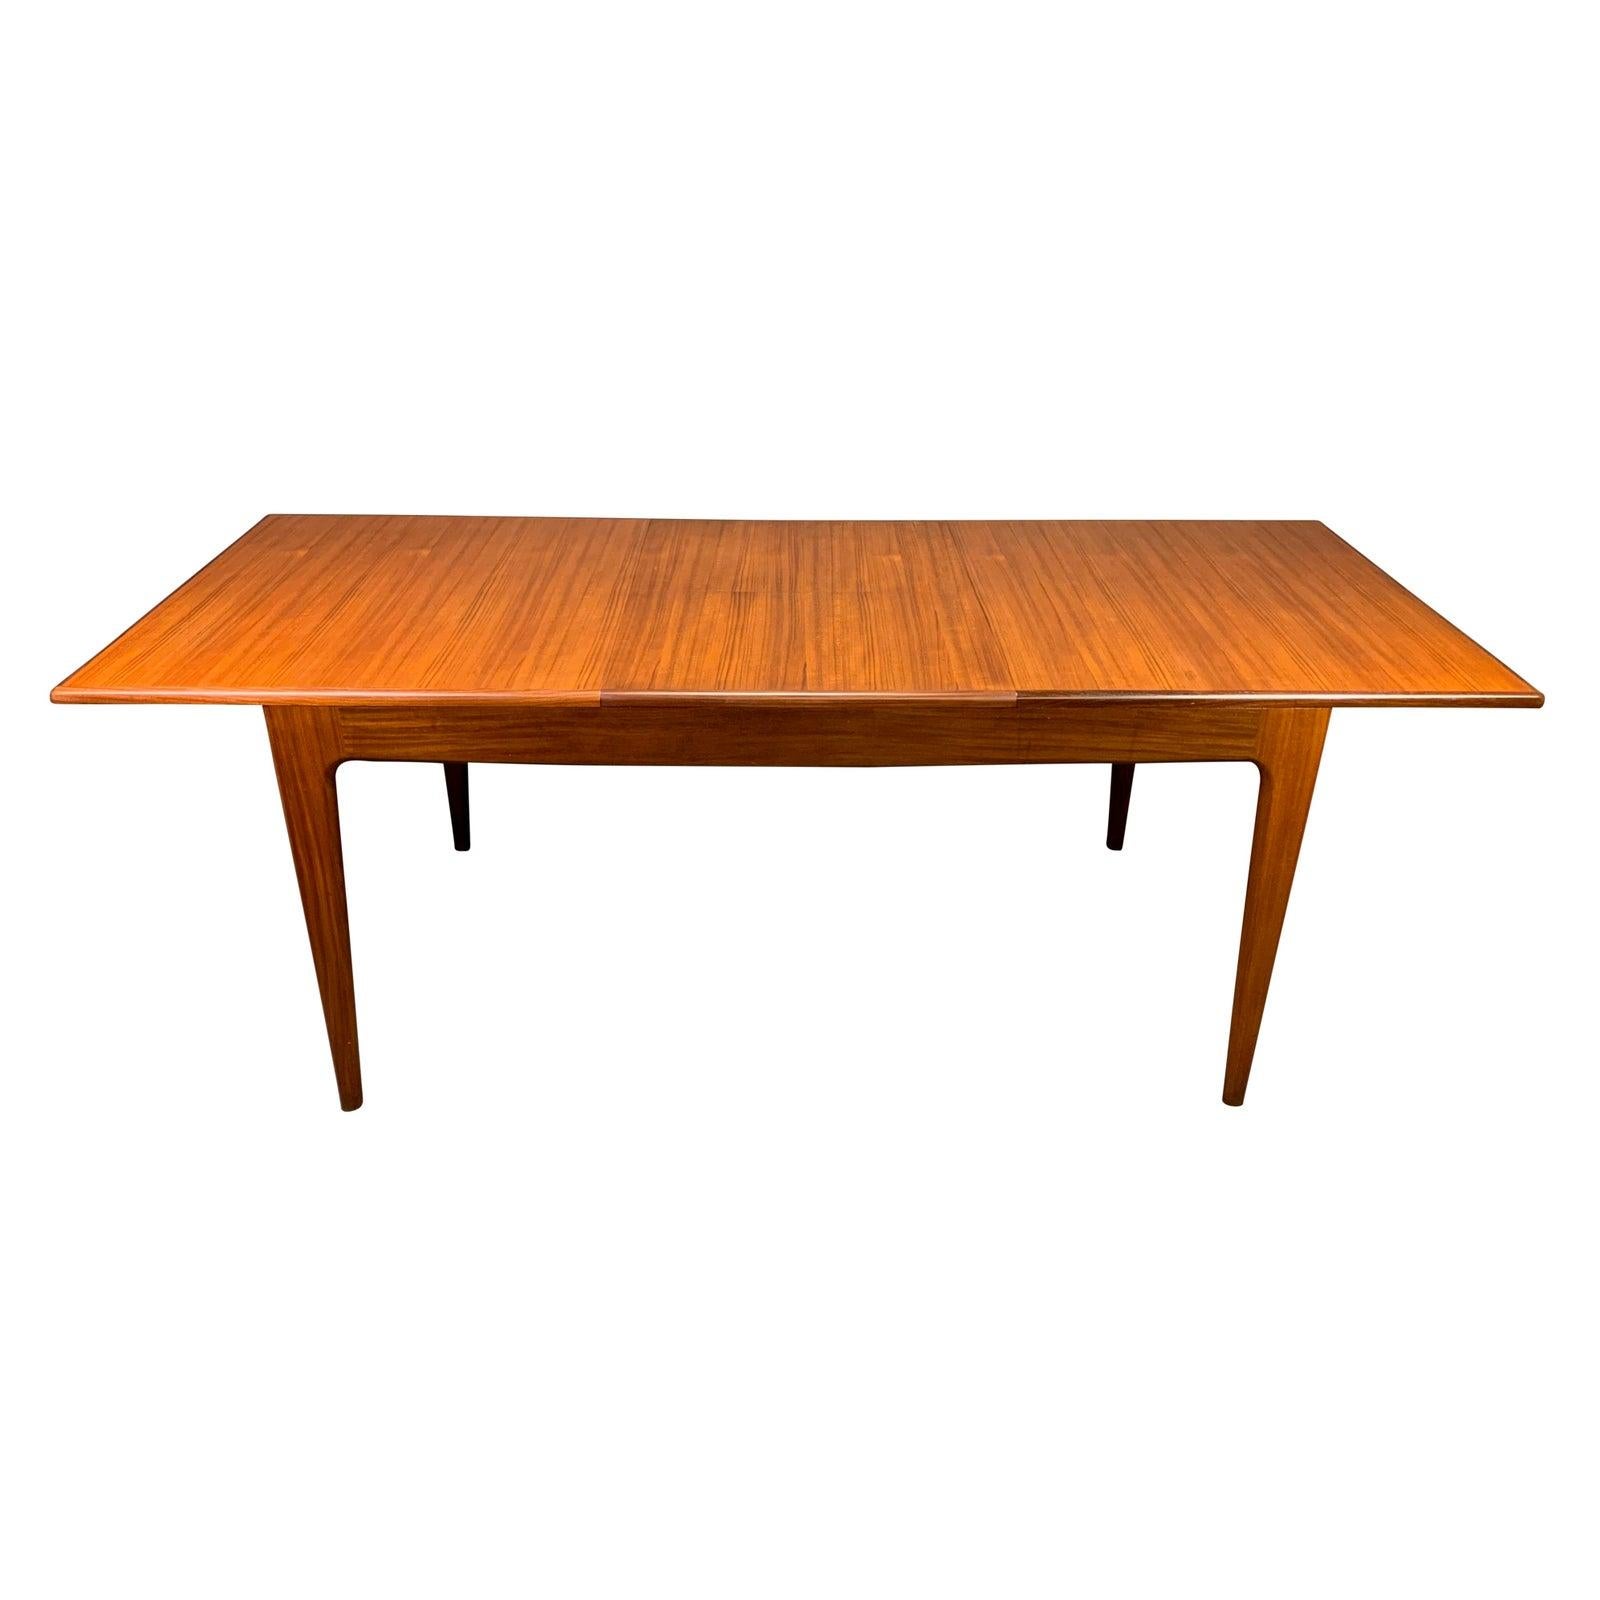 Here is an exclusive British Mid-Century Modern dining table designed by John Herbert and manufactured by A. Younger Ltd in Scotland in the 1960s.
This beautiful table, recently imported from UK to California before its restoration, features a